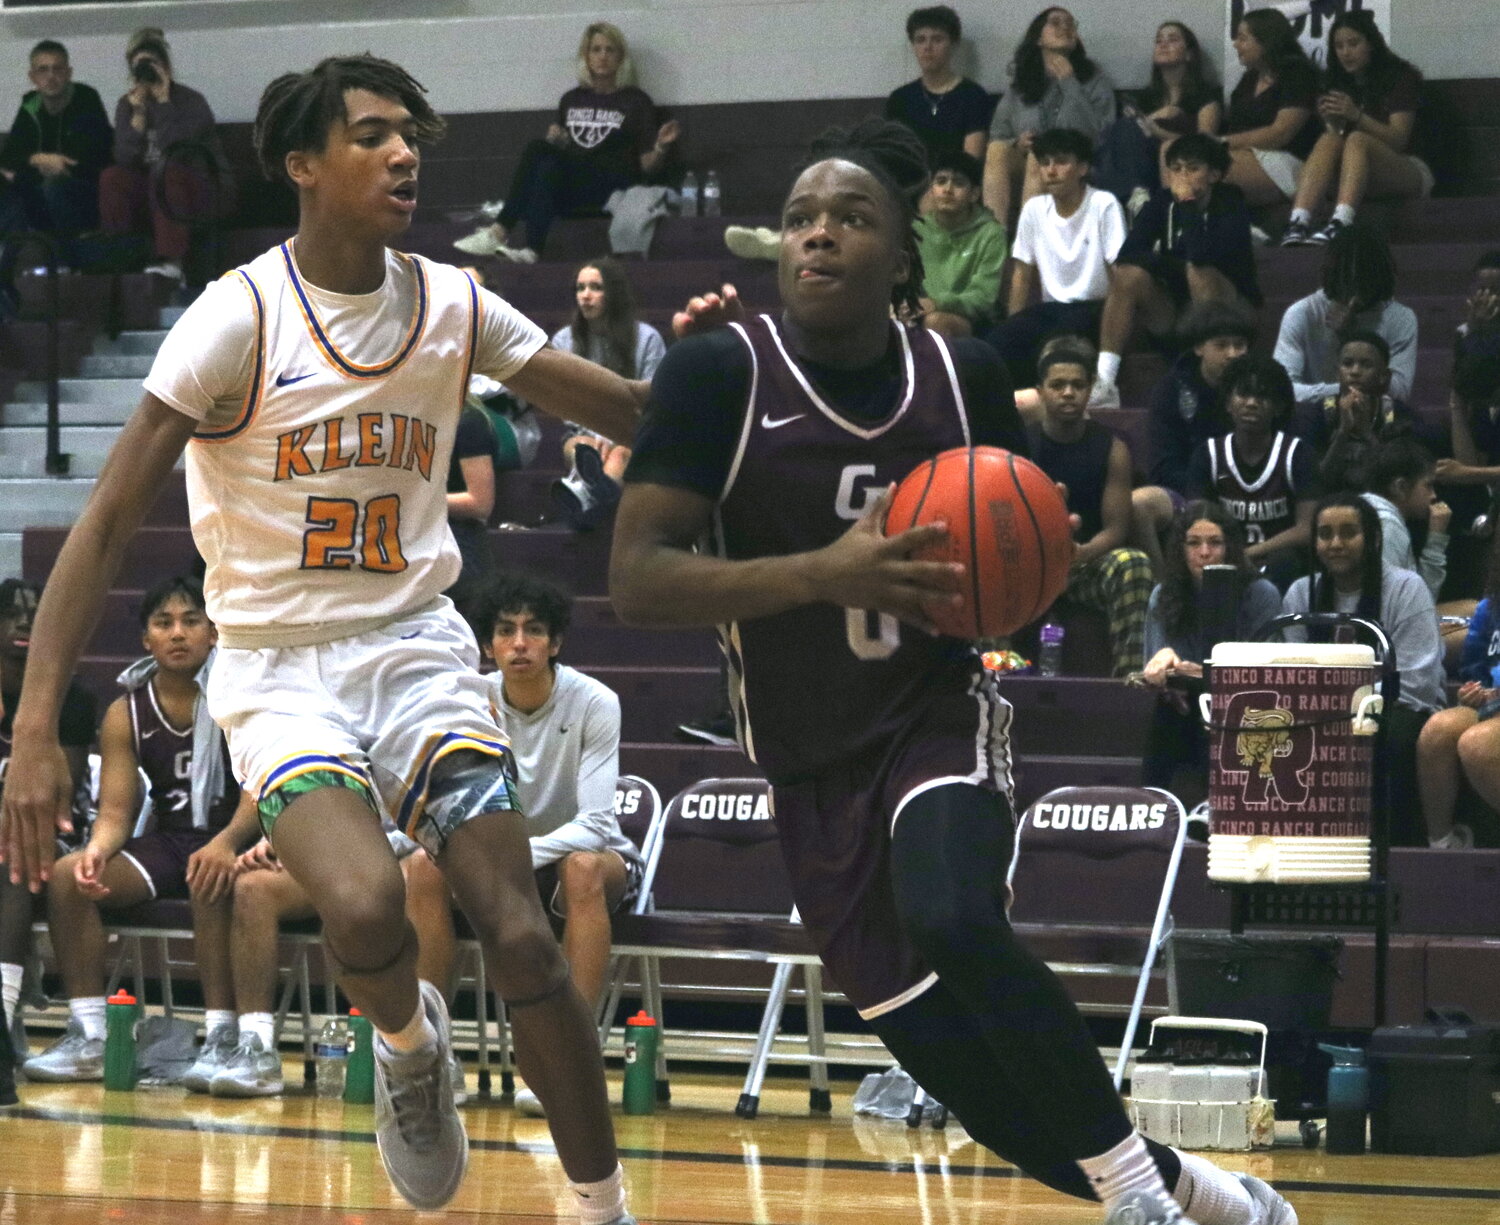 Prince Jones-Bynum drives to the basket during Friday's game between Cinco Ranch and Klein at the Cinco Ranch gym.